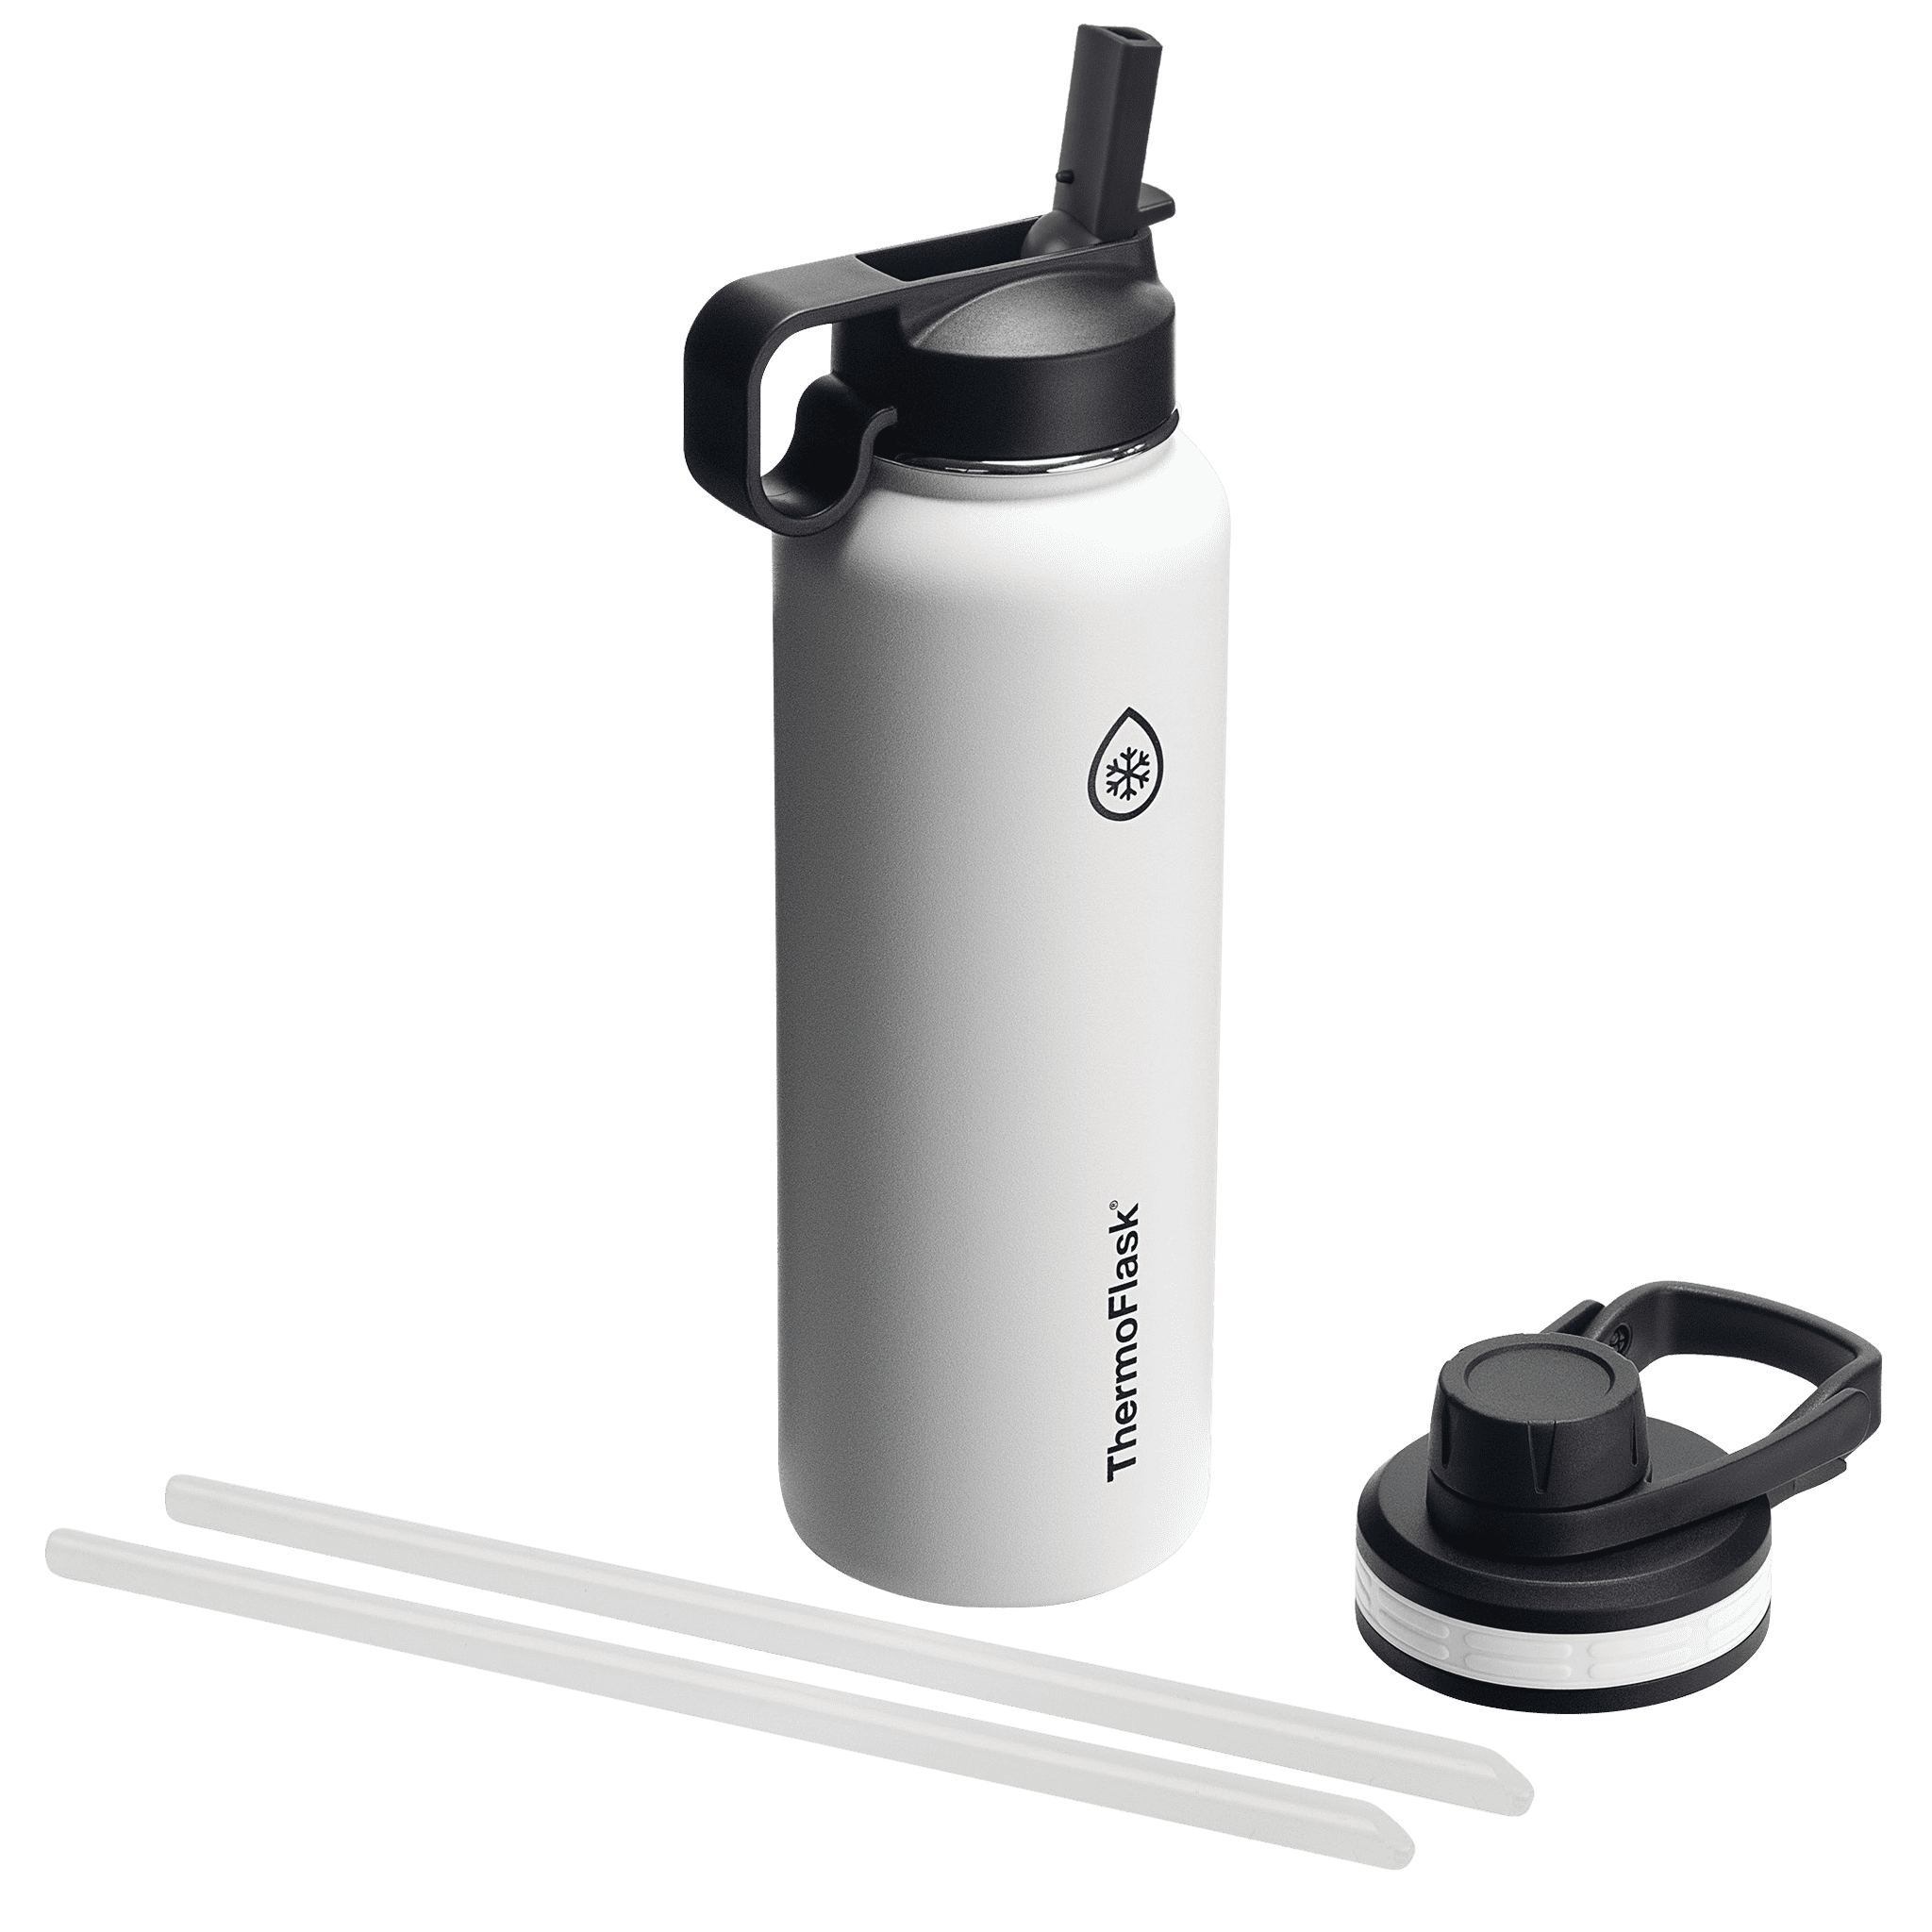 Thermoflask 50050 Double Insulated Stainless Steel Water Bottle with Chug Straw Lid 24 oz Black 